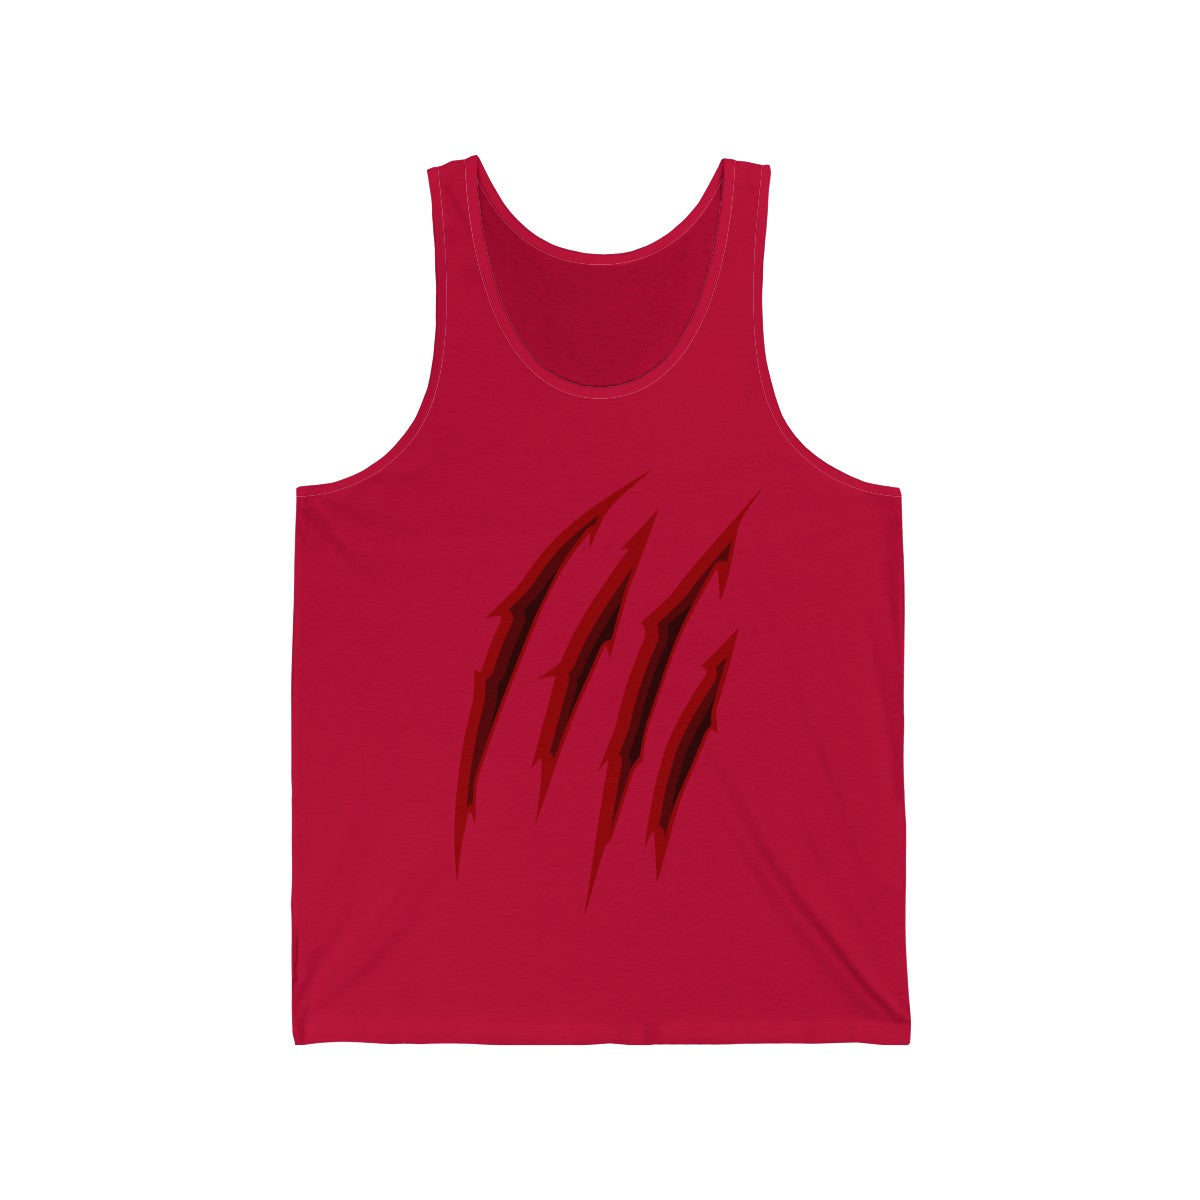 Scratch Red - Tank Top Tank Top Wexon Red XS 